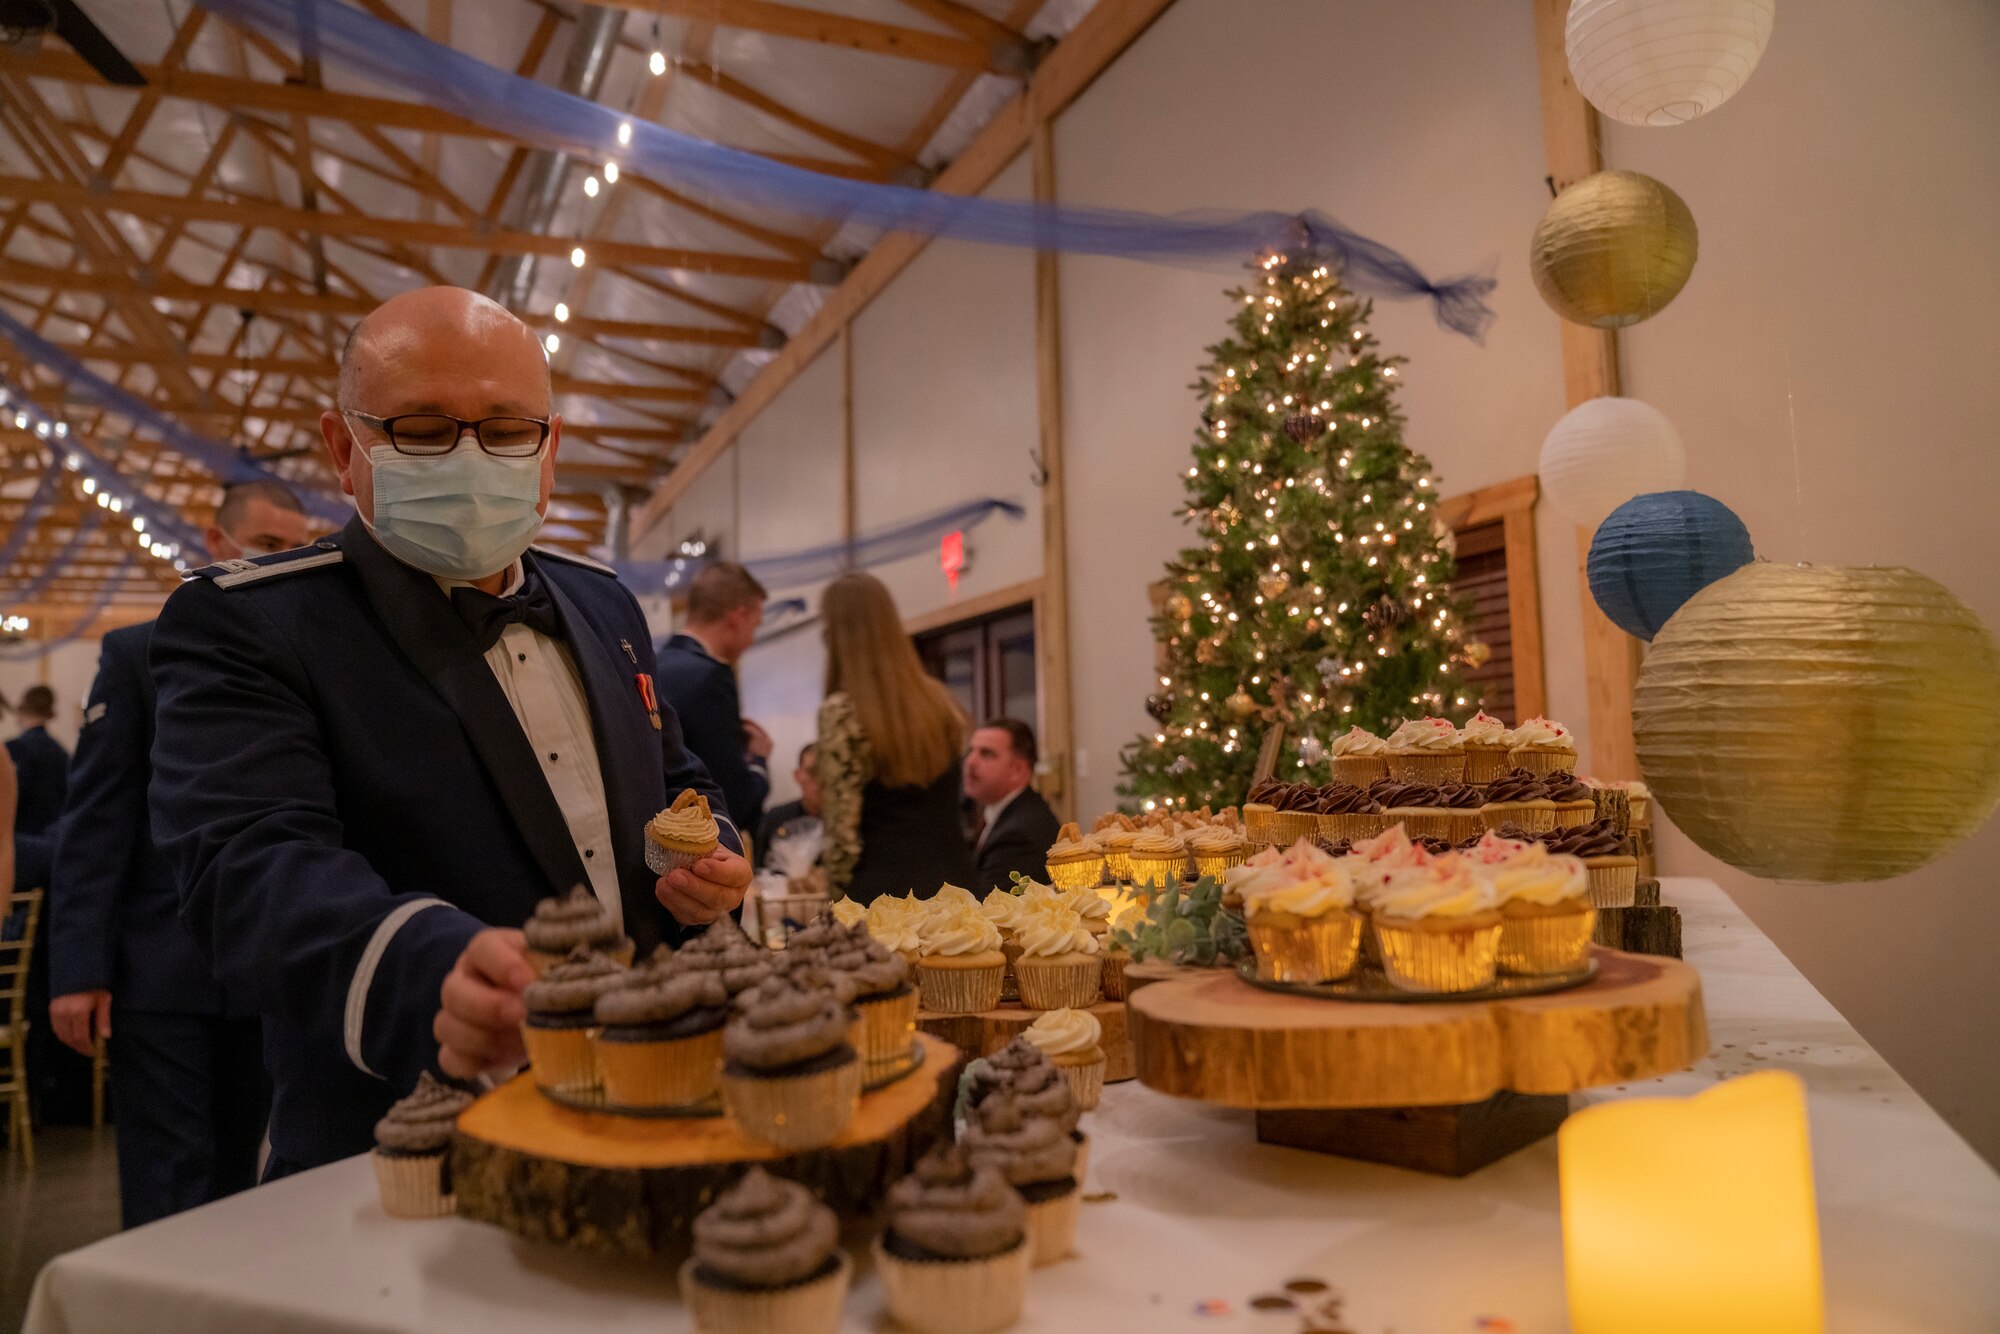 A male Airman is grabbing a cupcake from a cupcake stand with a Christmas tree in the background.